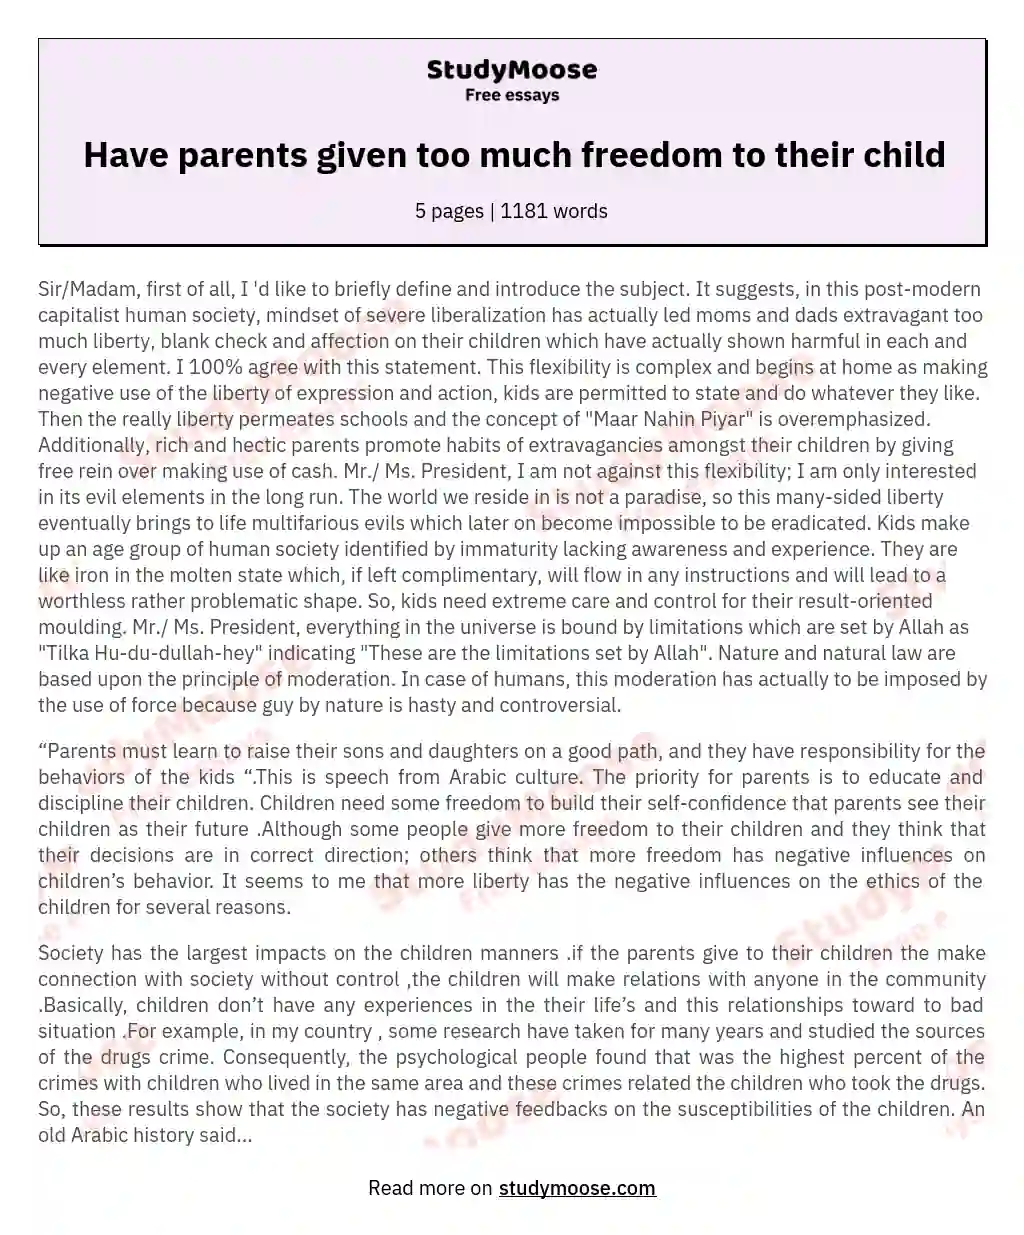 Have parents given too much freedom to their child